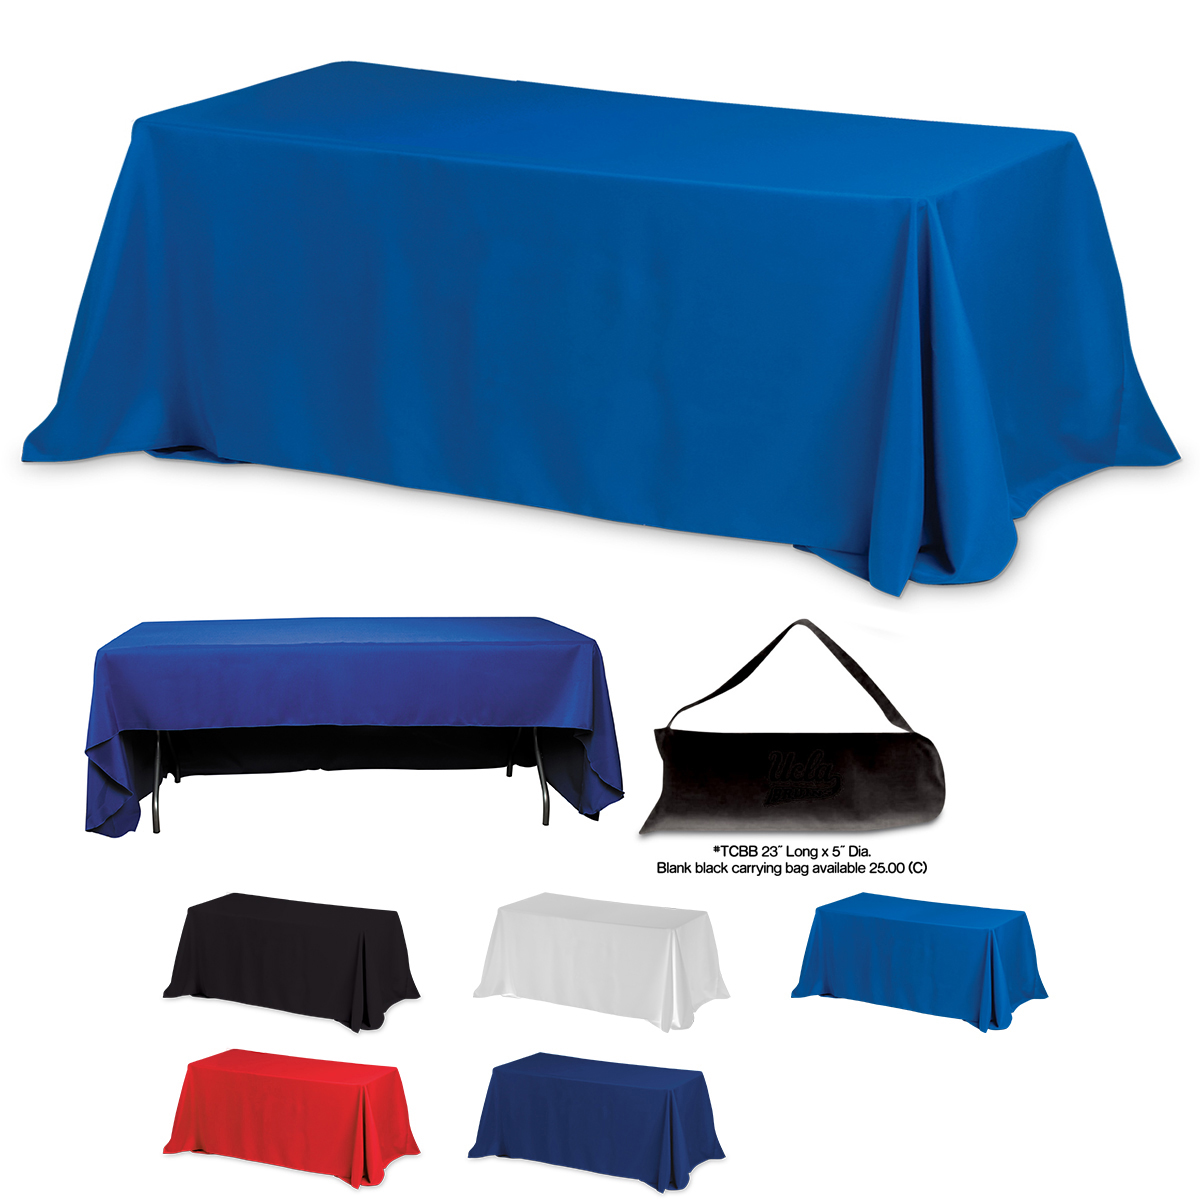 "PREAKNESS EIGHT" Fits 8 ft Table 3-Sided Economy Table Cover Throws (Spot Color Print)